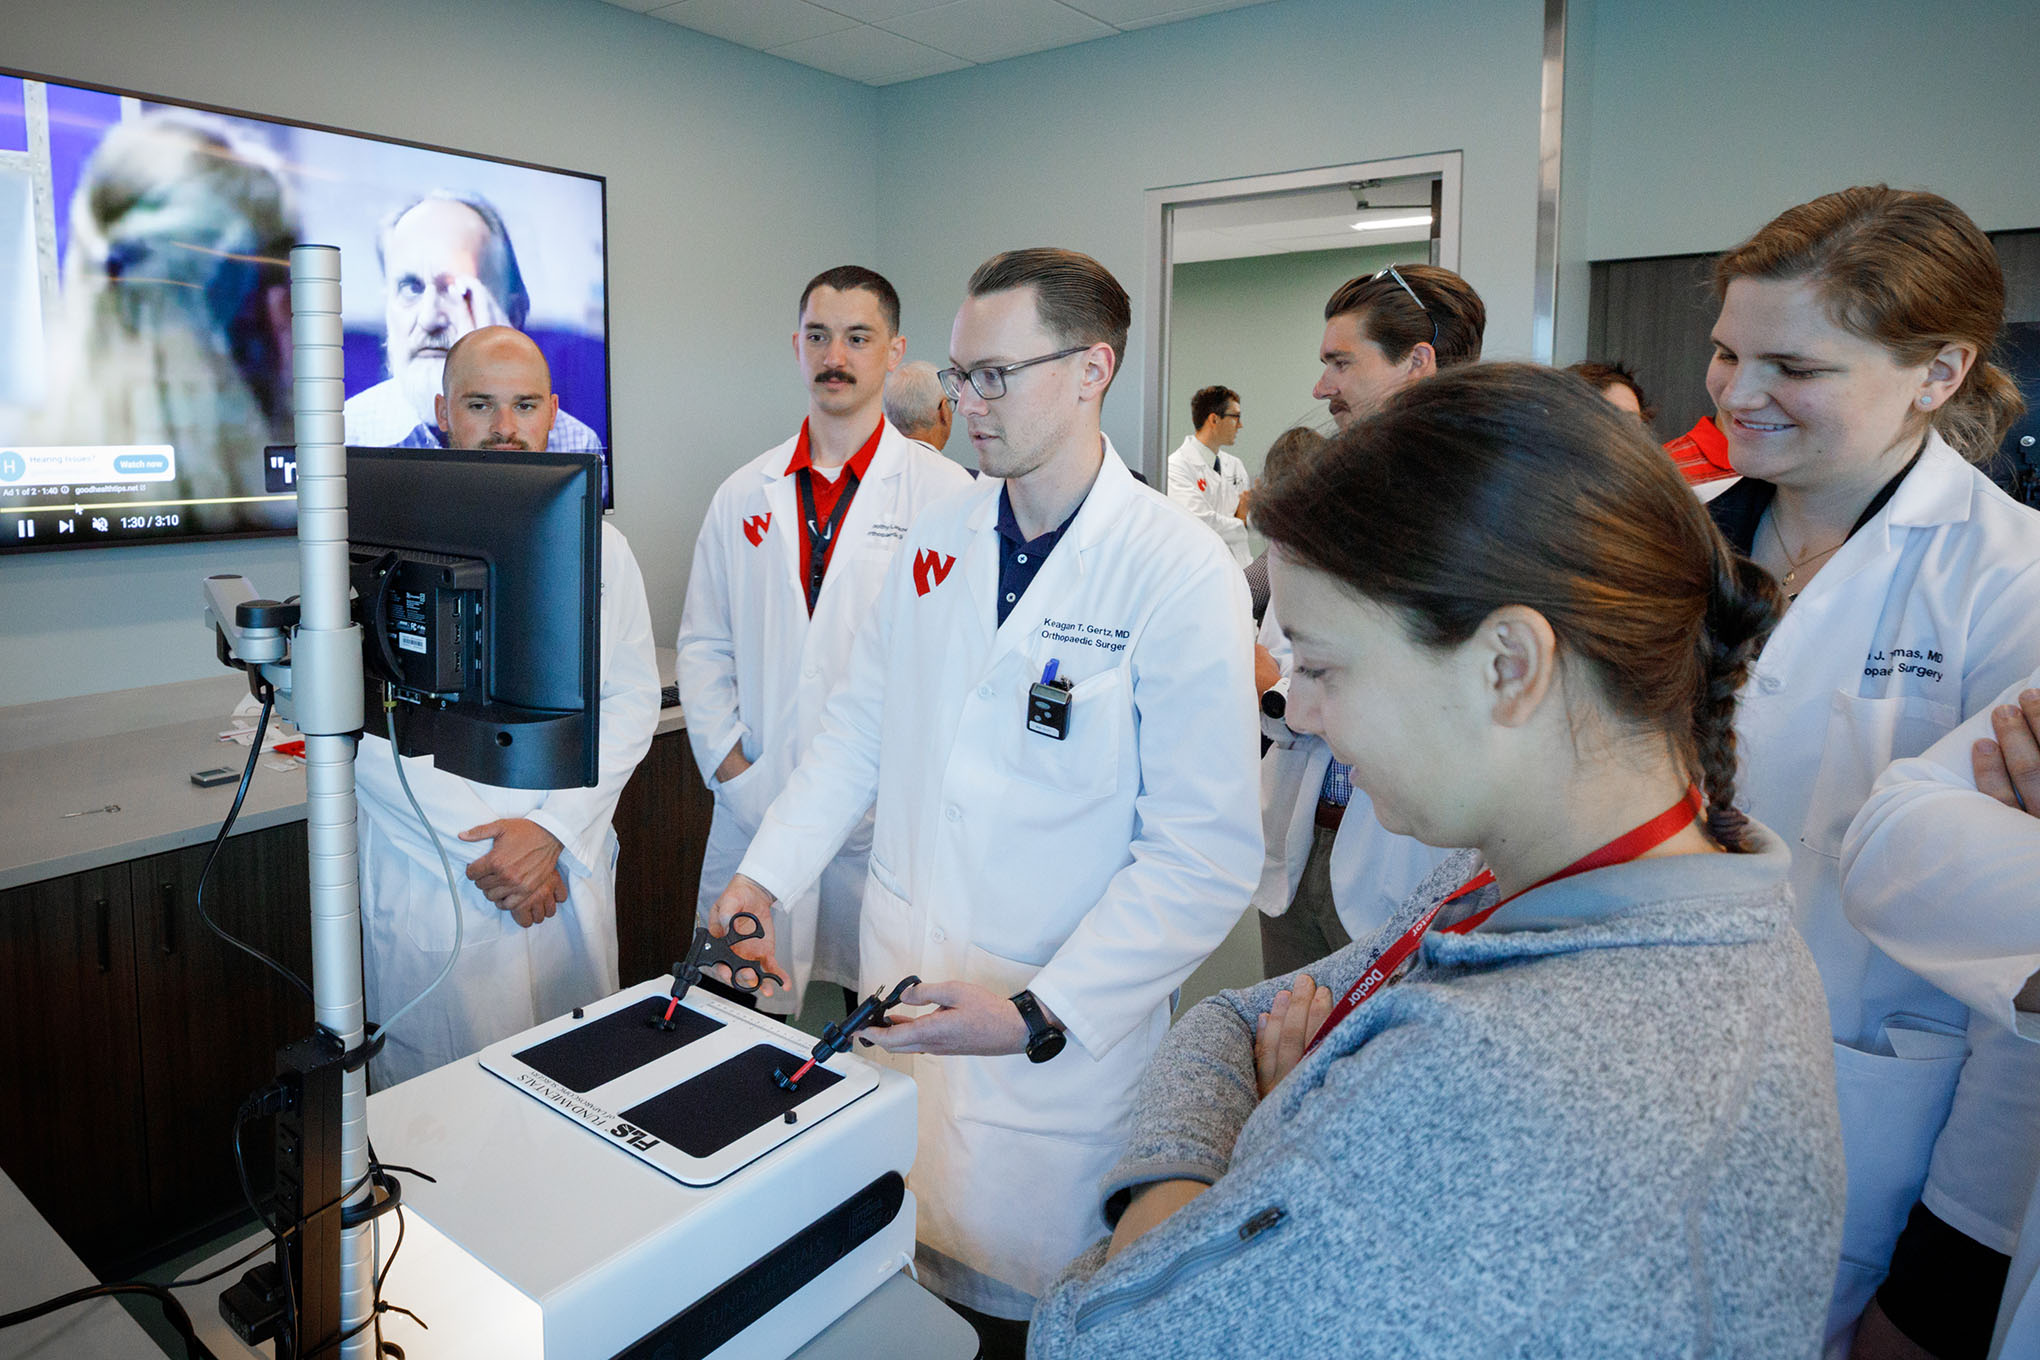 The UNMC Department of Orthopaedic Surgery and Rehabilitation and representatives from the American Board of Orthopaedic Surgery tour iEXCEL’s surgery simulation and virtual reality areas in the Davis Global Center&period;